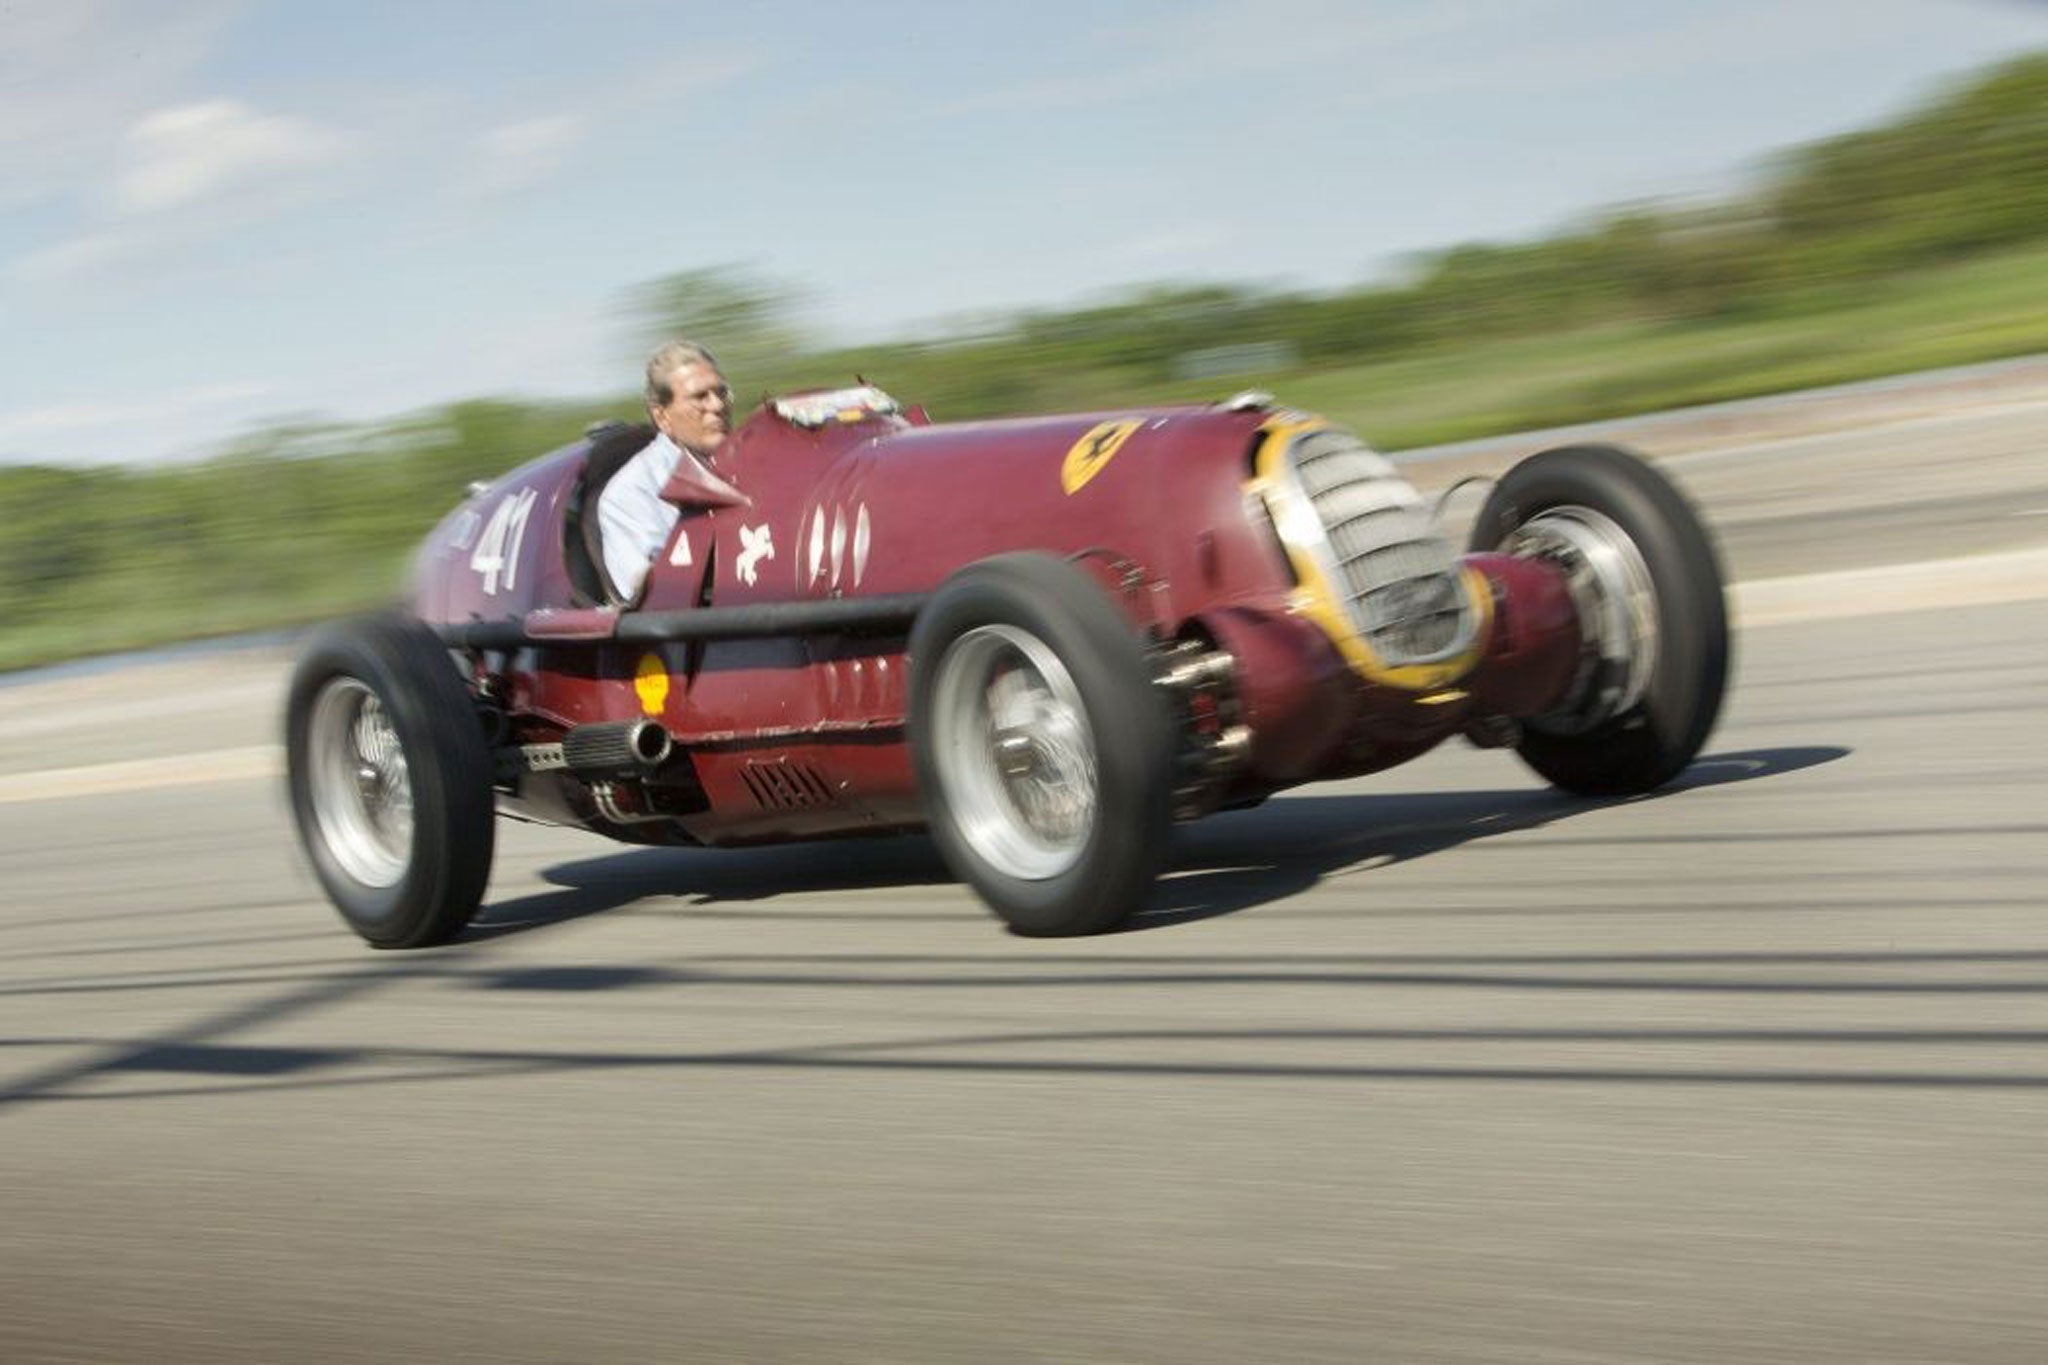 Bonhams sold this 1935 Alfa Romeo for £5.9m at the Goodwood Revival Meeting, a world record for the marque